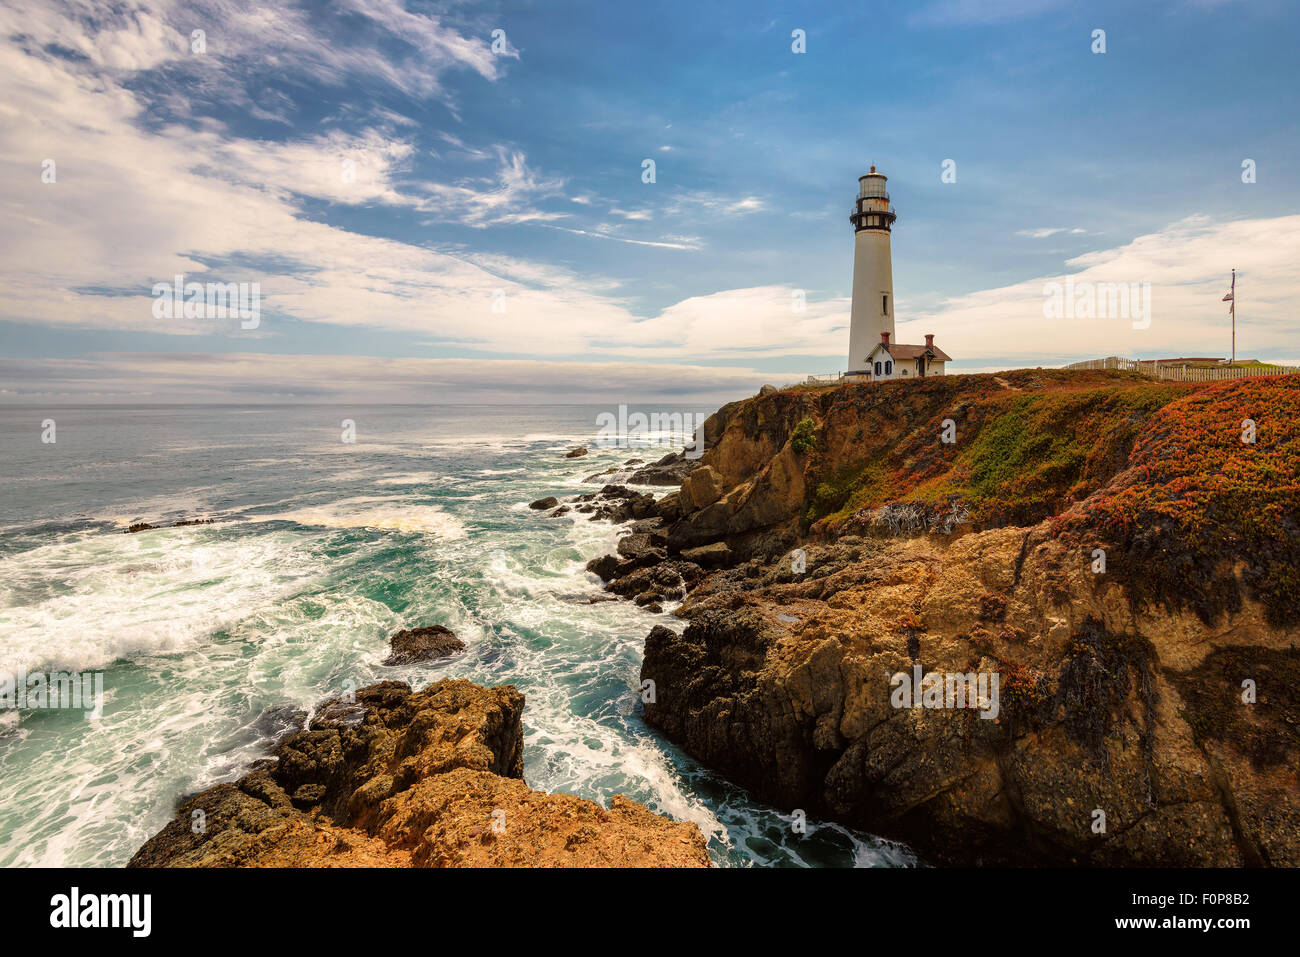 Pigeon Point Lighthouse on the rock, along Pacific coastline in California Stock Photo